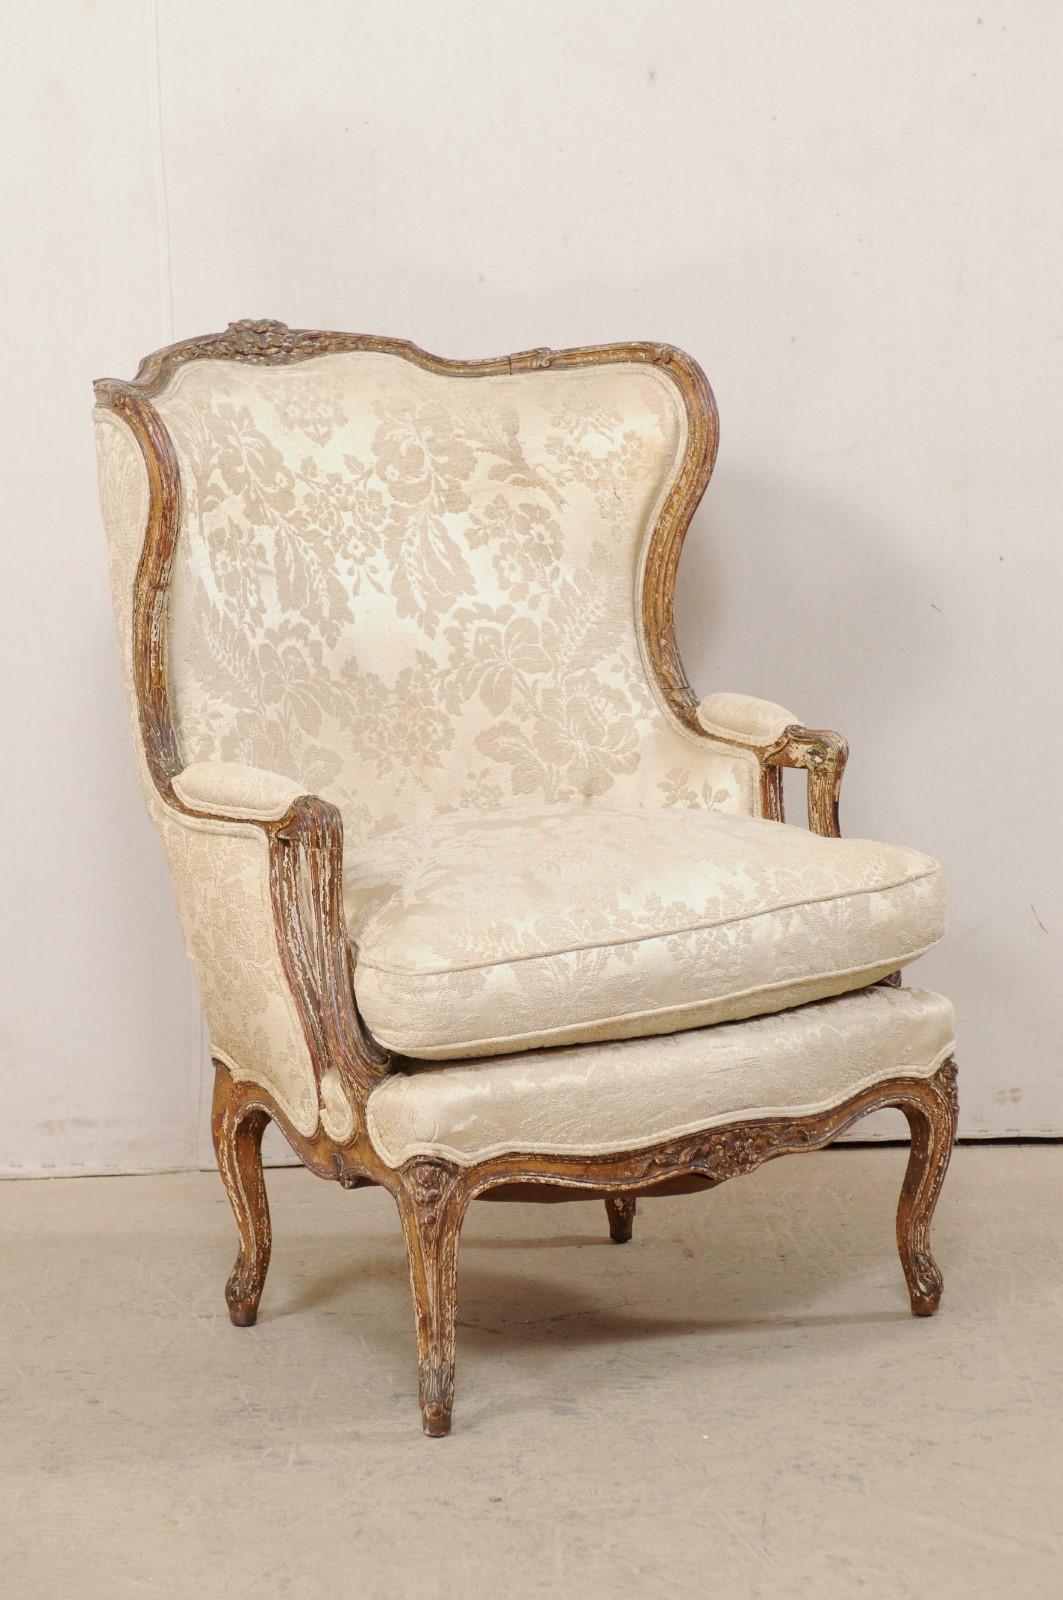 A French Louis XVI style winged back bergère chair, with it's original paint, from the 19th century. This antique chair from France features an elegant and shapely winged back, with finely carved wood trim about the crest and arms with a foliate